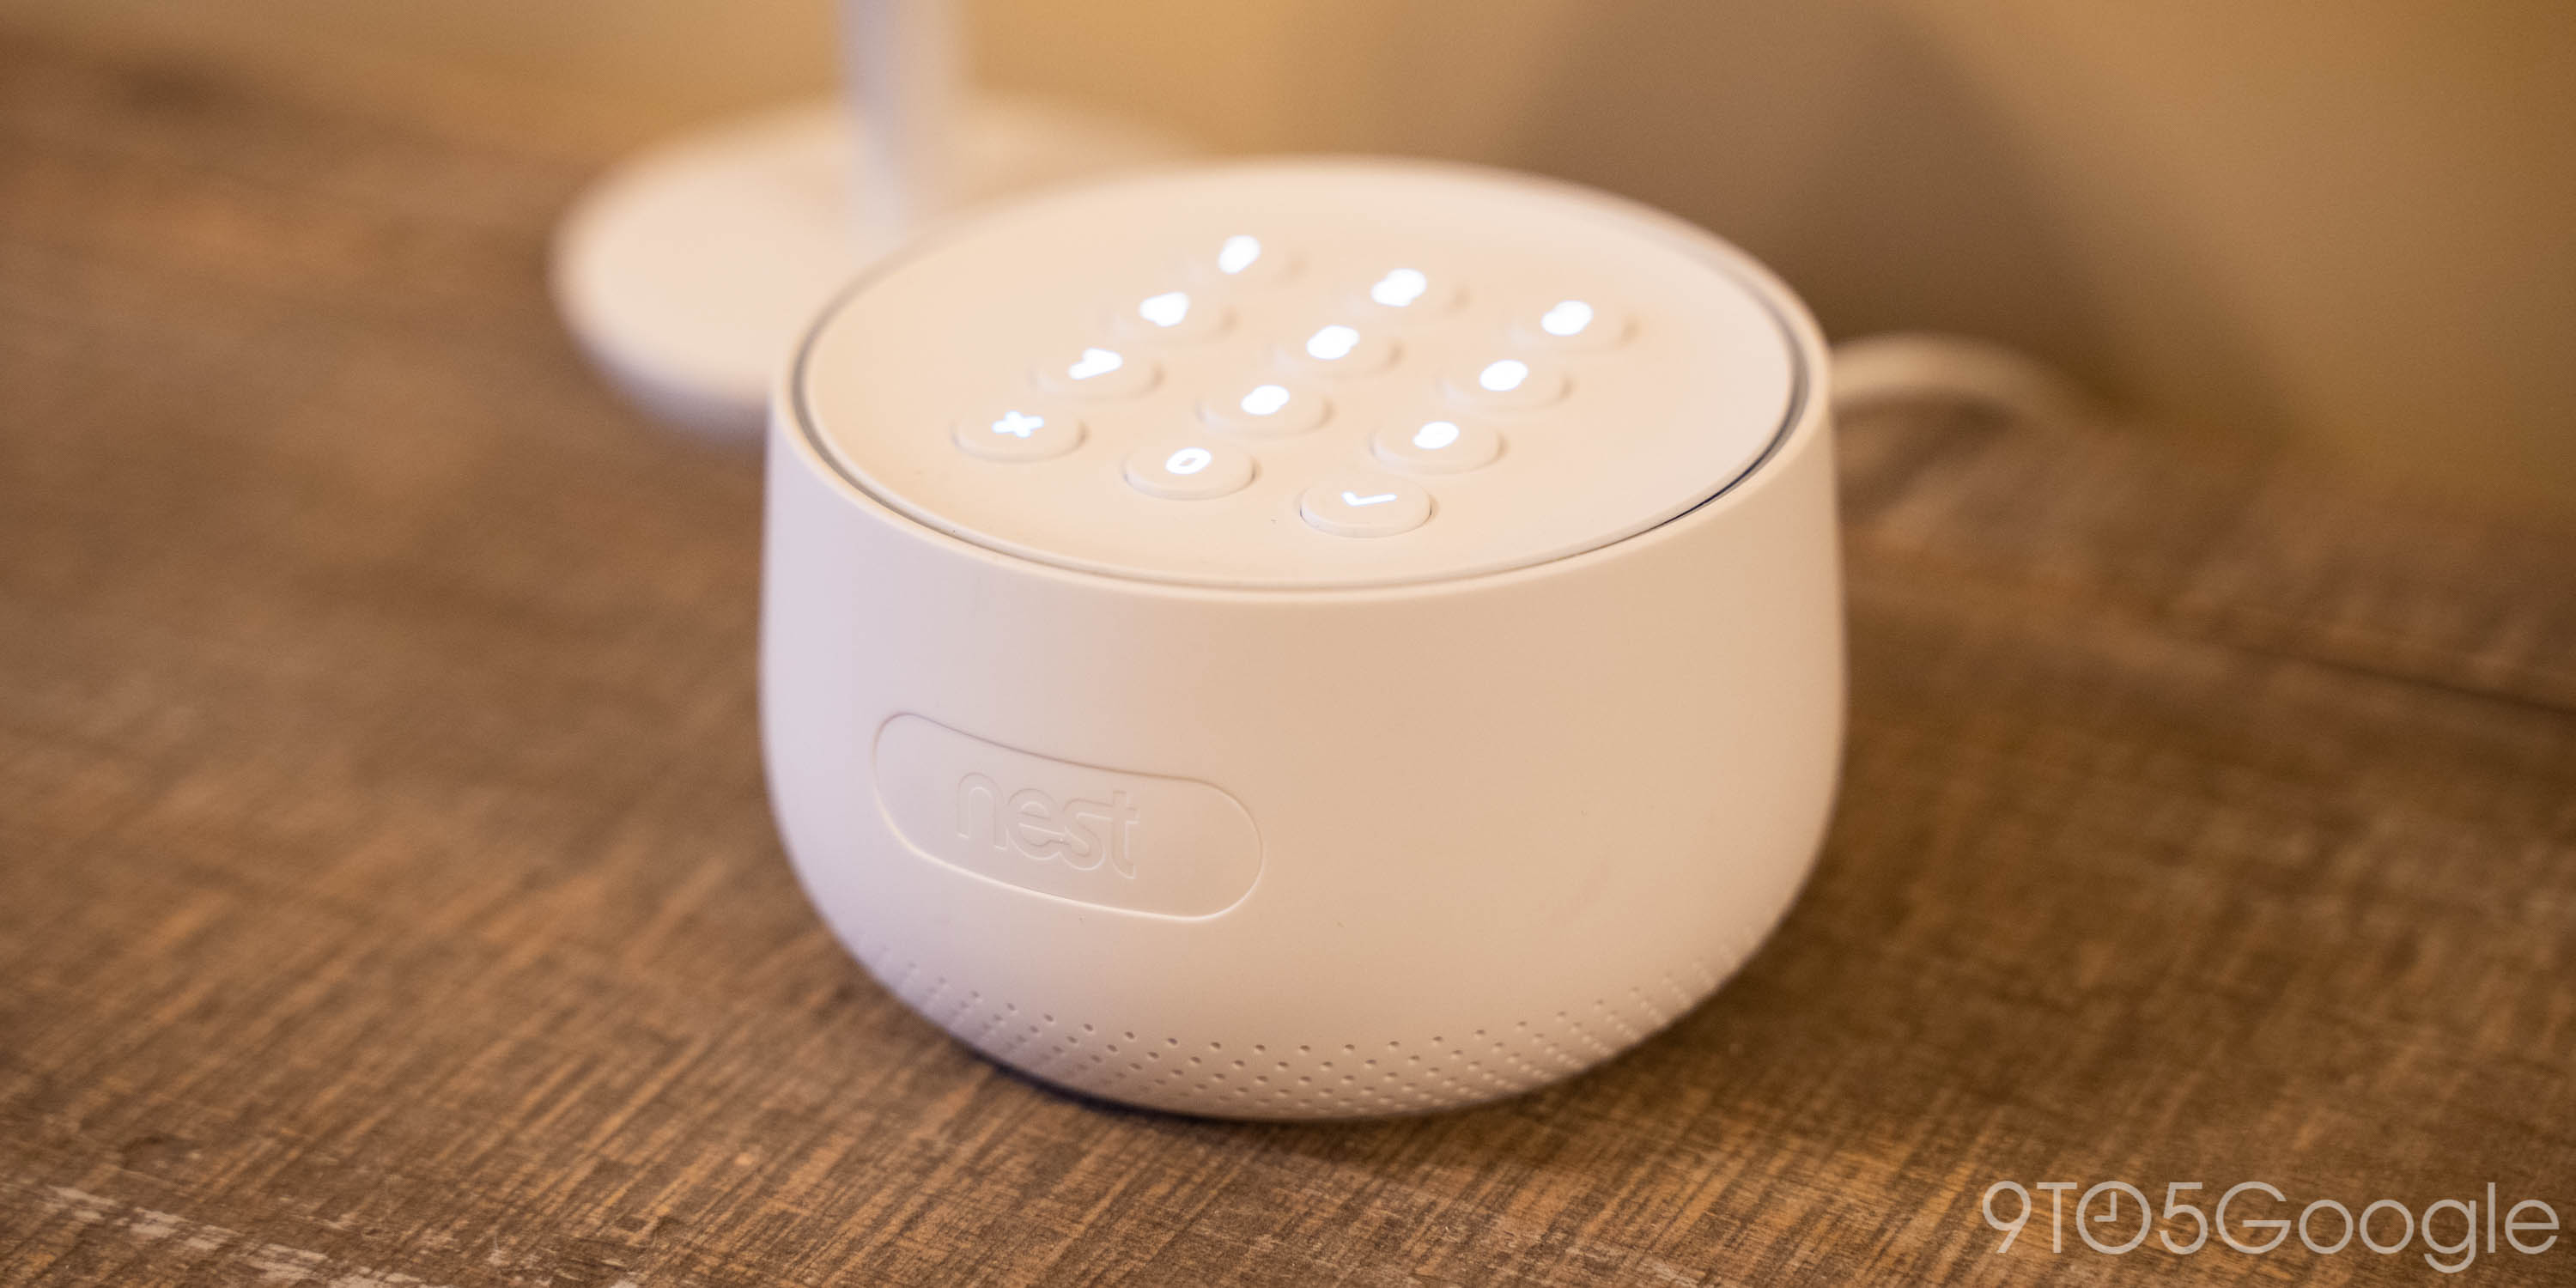 SwitchBot Hub 2 brings gear to Google Home thanks to Matter